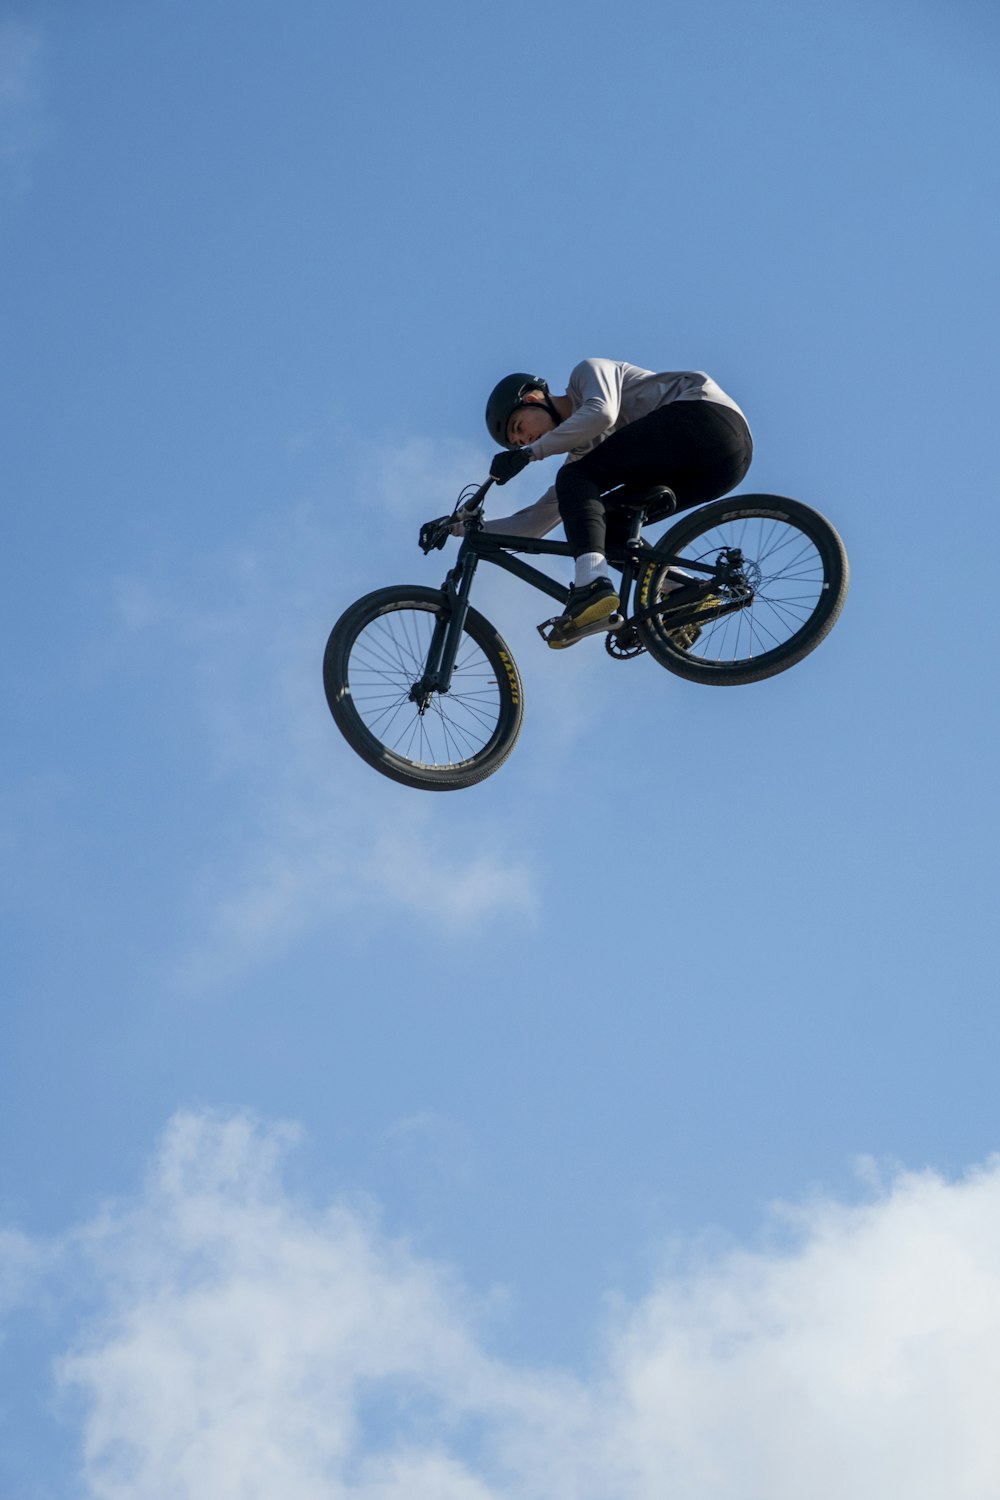 a man doing a stunt on a bicycle